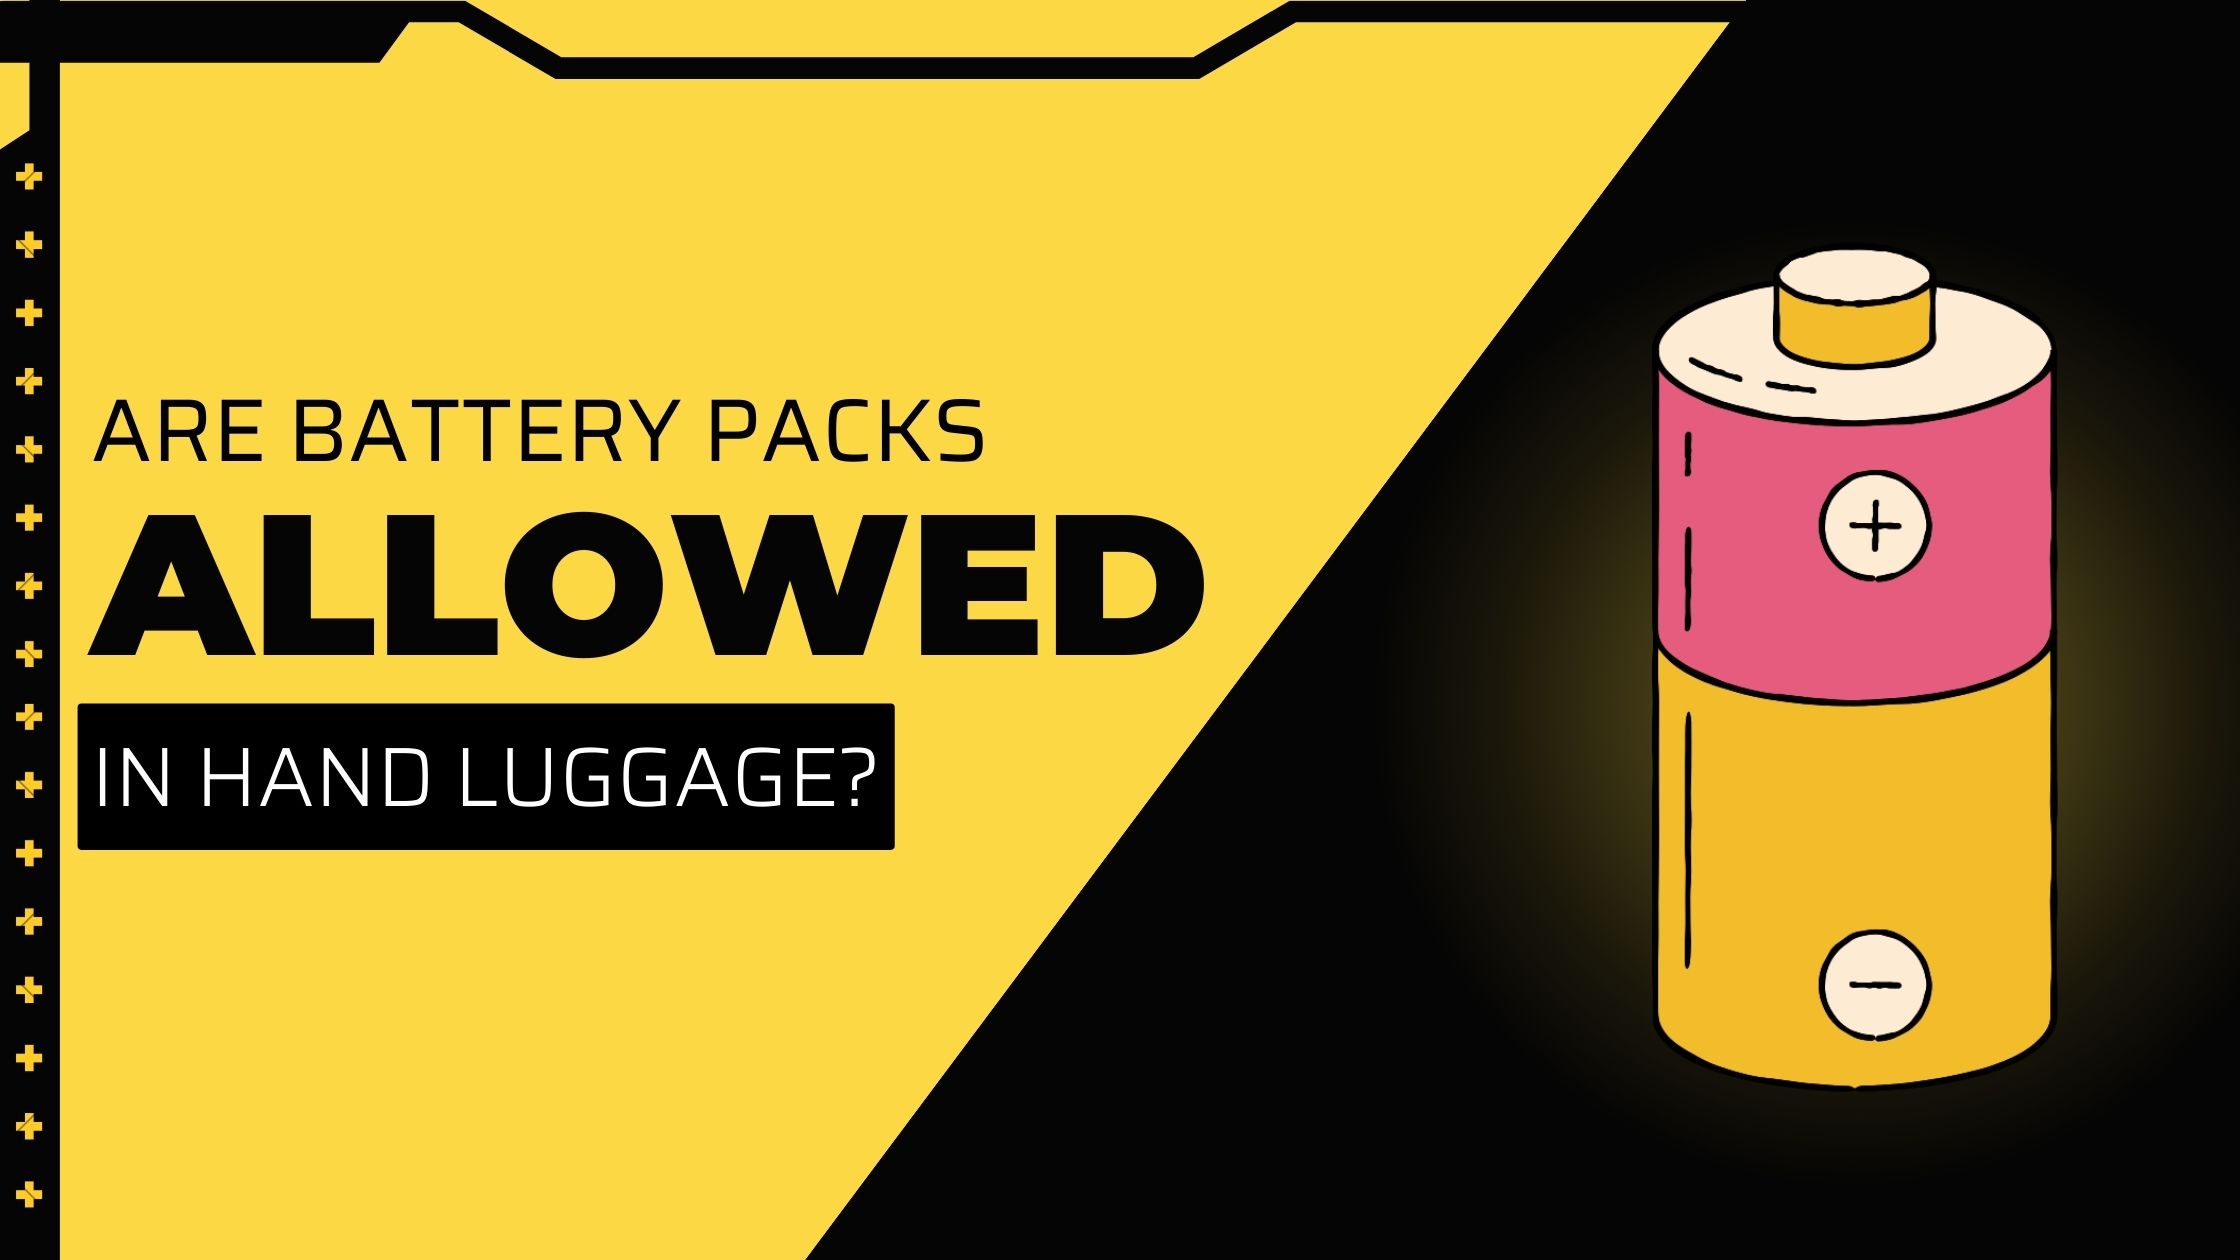 Are Battery Packs Allowed In Hand Luggage (1)